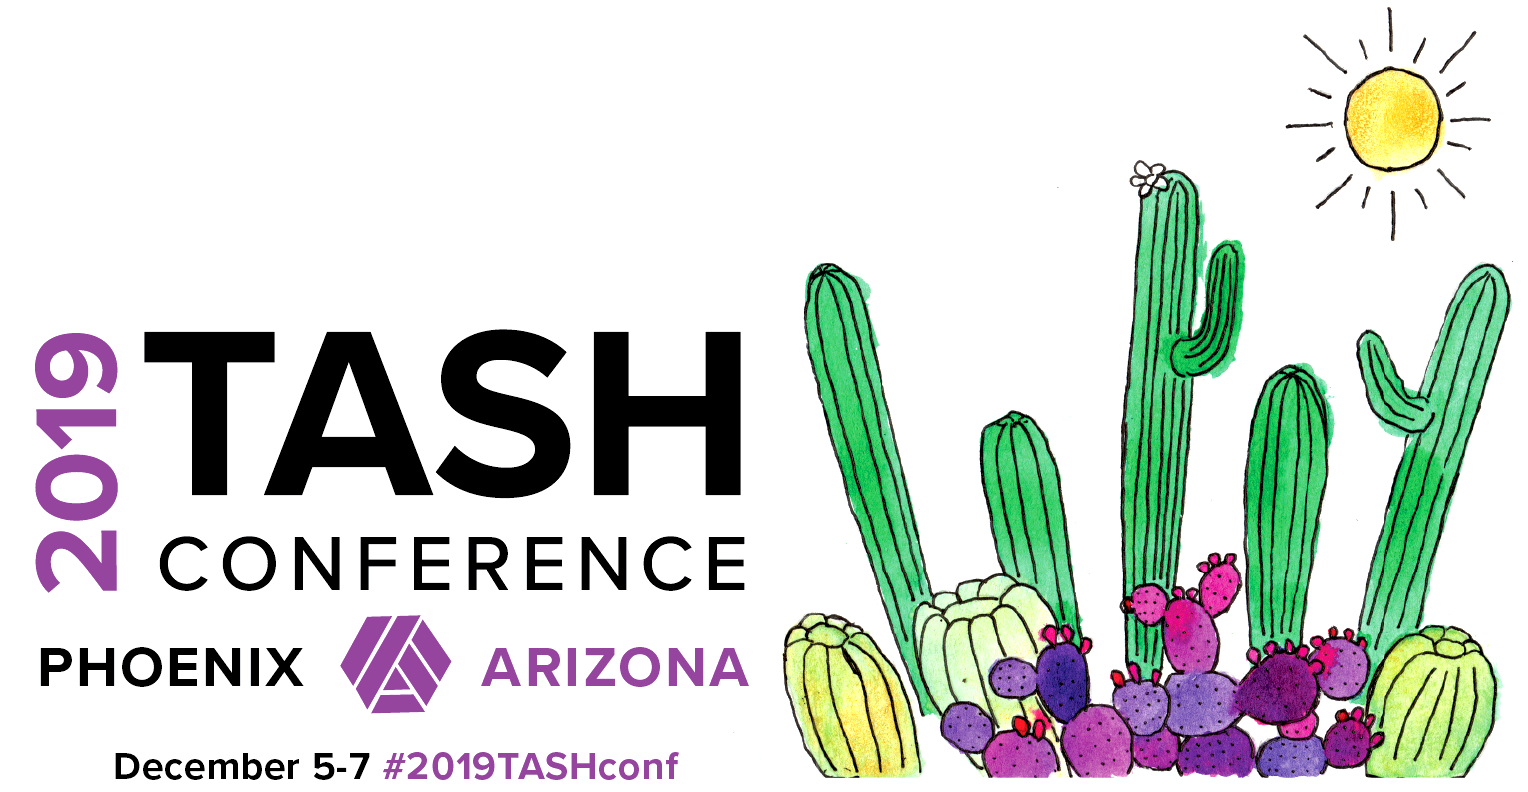 The 2019 TASH Conference banner. A stylized illustration of a grove of cacti. The tall saguaros are green. The low prickly pear cacti are shades of purple. The text says that the conference is in Phoenix, Arizona, December 5th through 7th.